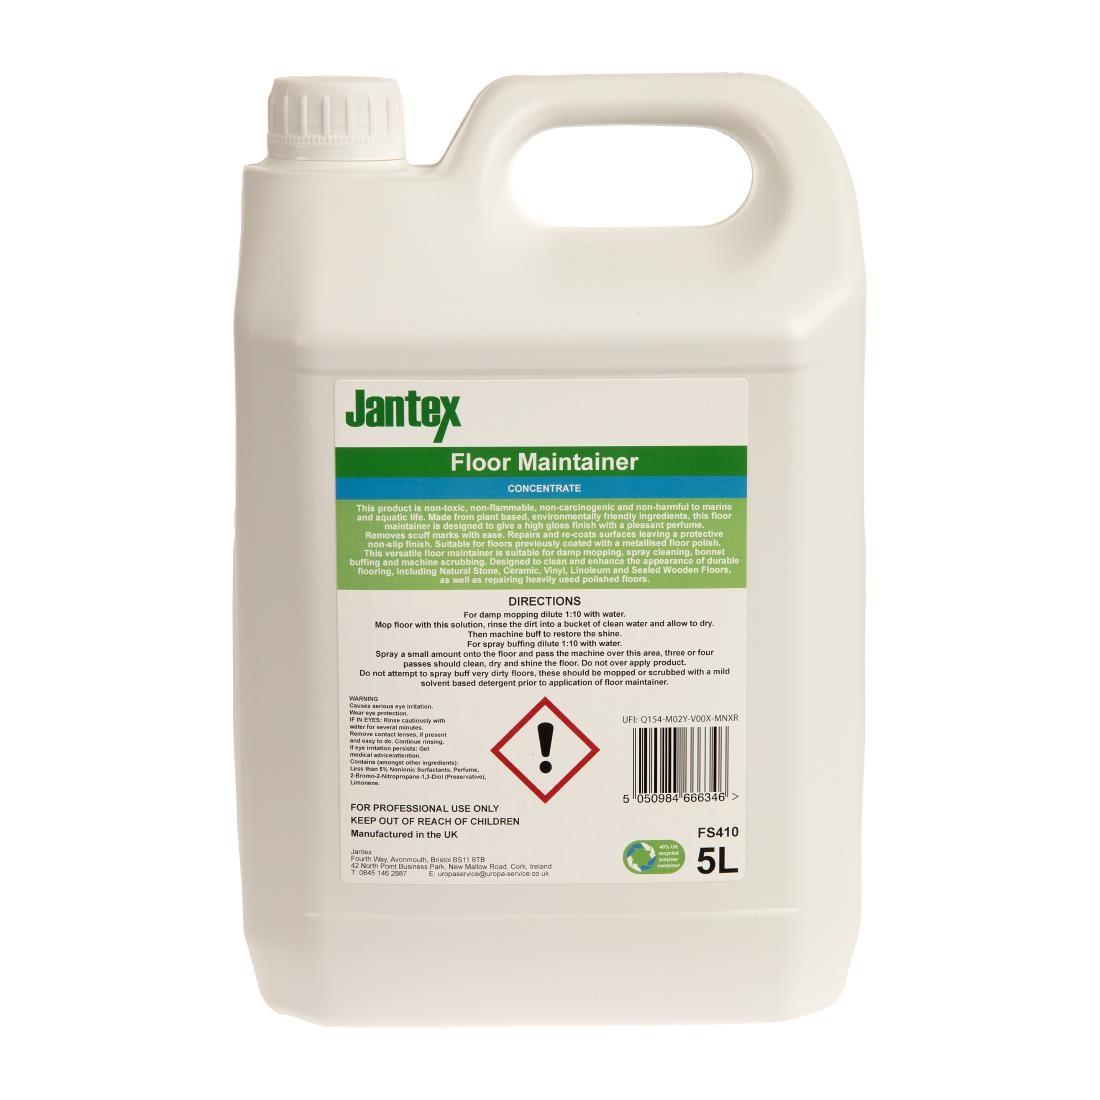 Jantex Green Floor Maintainer Concentrate 5Ltr - FS410  - 3